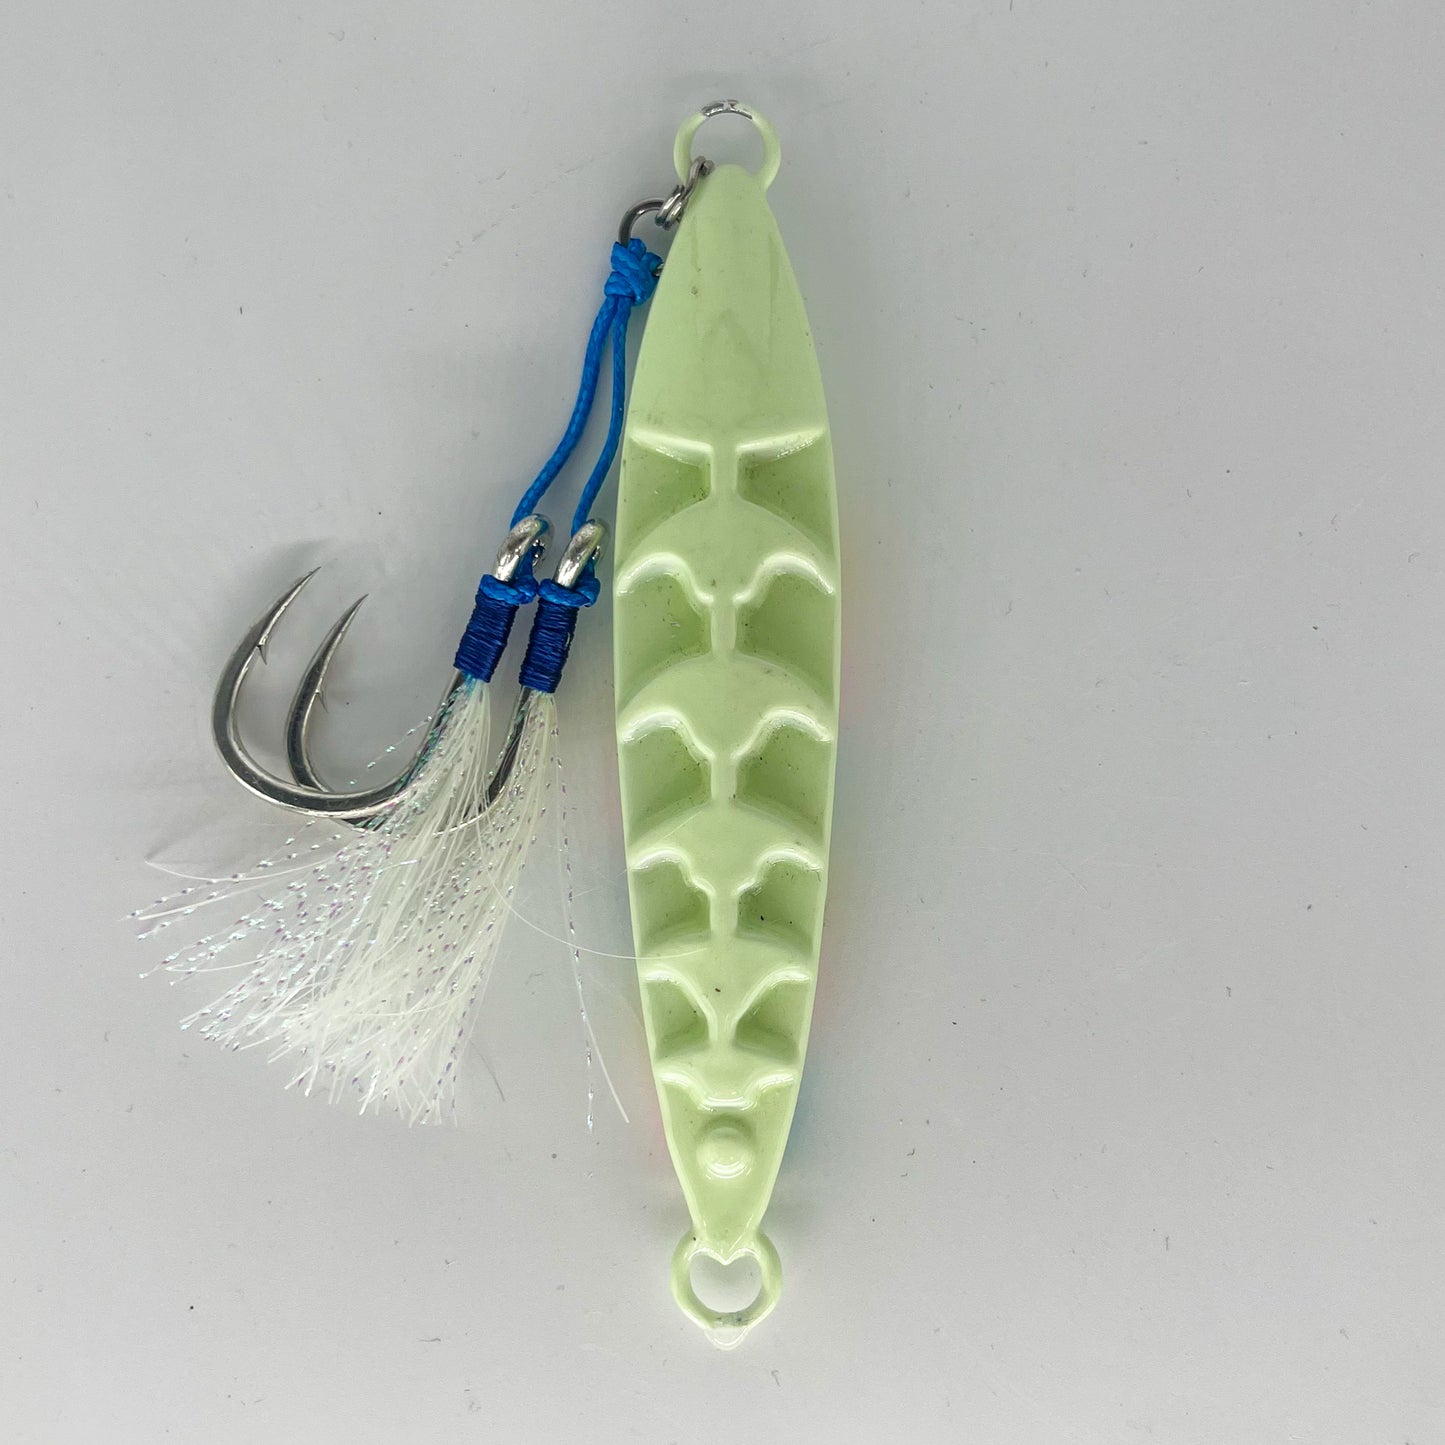 Slow Pitch Metal 'Scraggy' Fishing Jig Pre Rigged